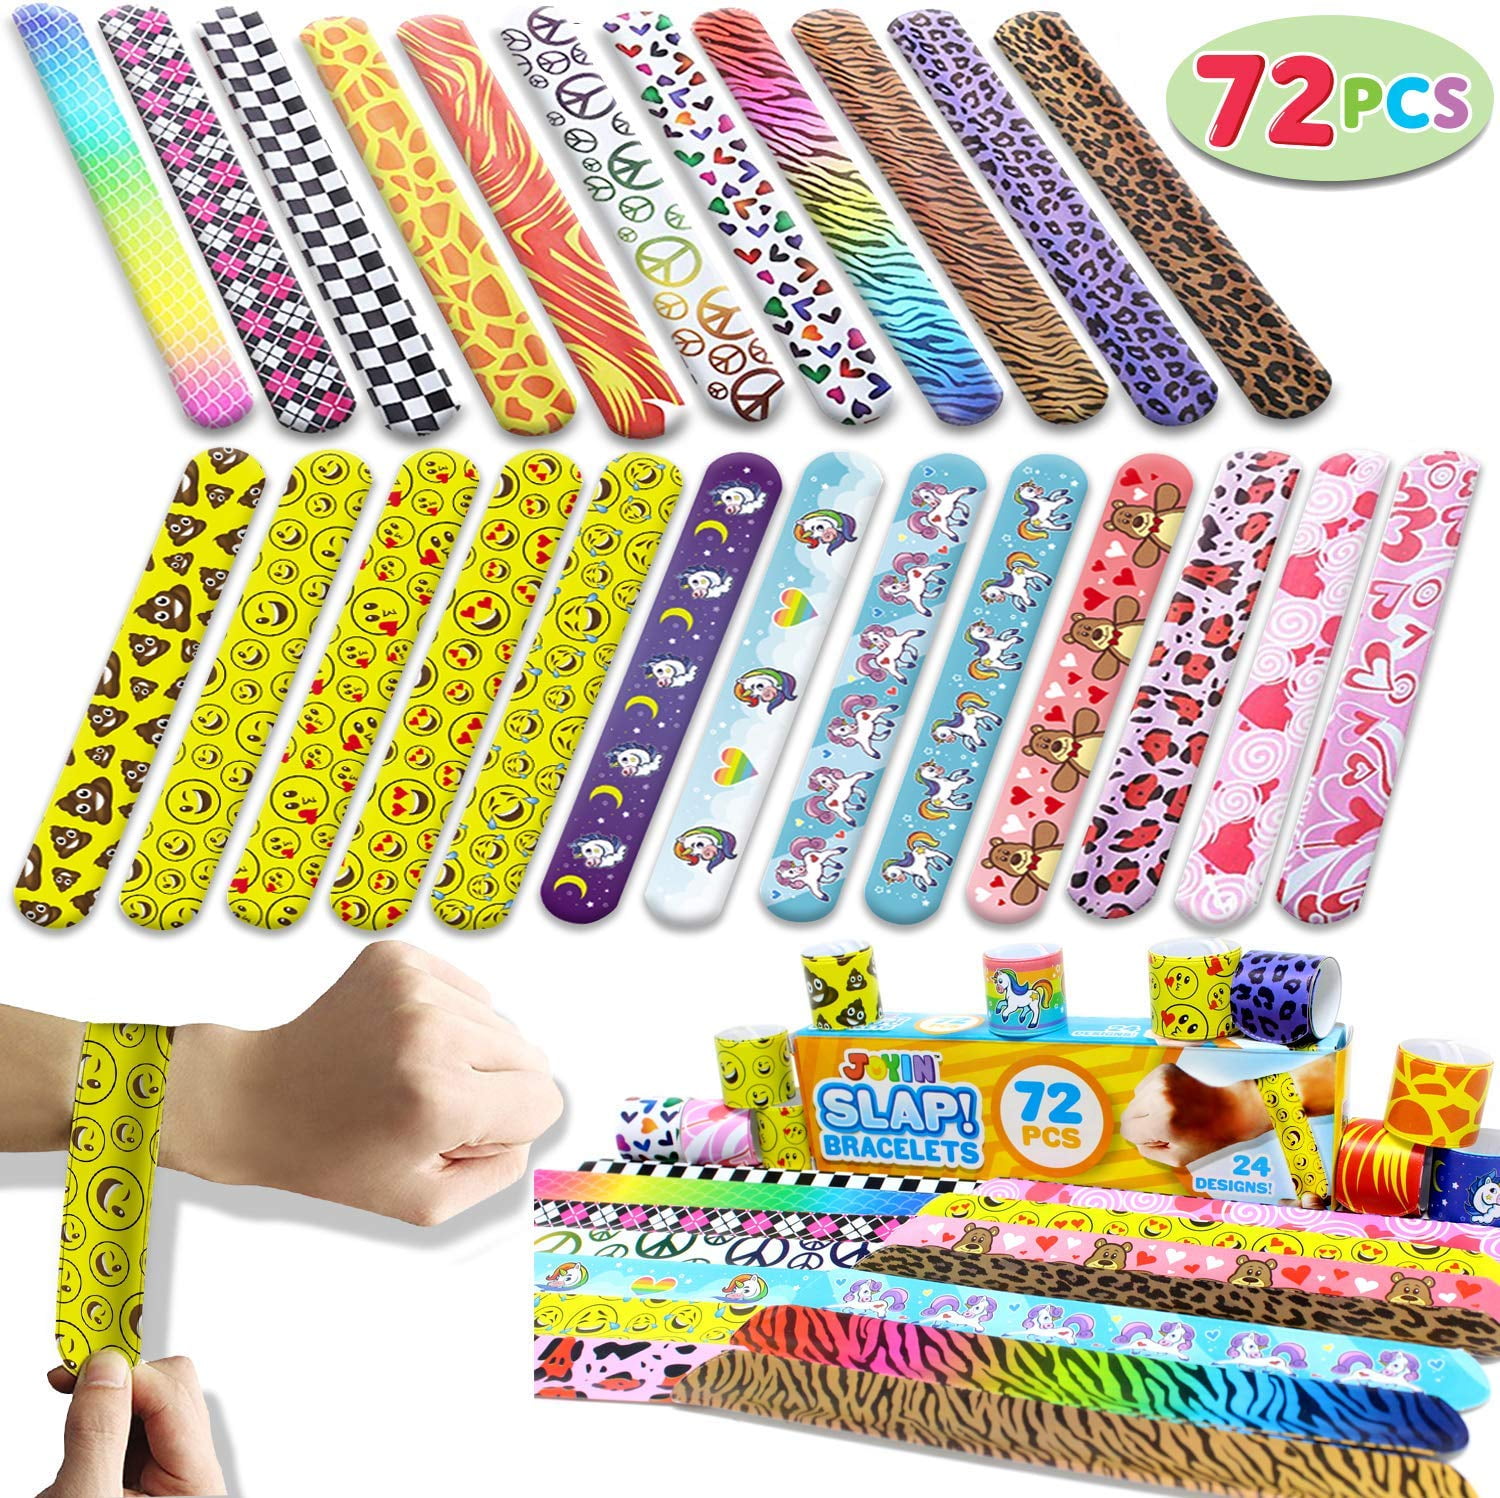 24 EMOJI BRACELETS RUBBER SILICONE EMOTICON CARNIVAL GOODY BAGS PRIZES PARTY 